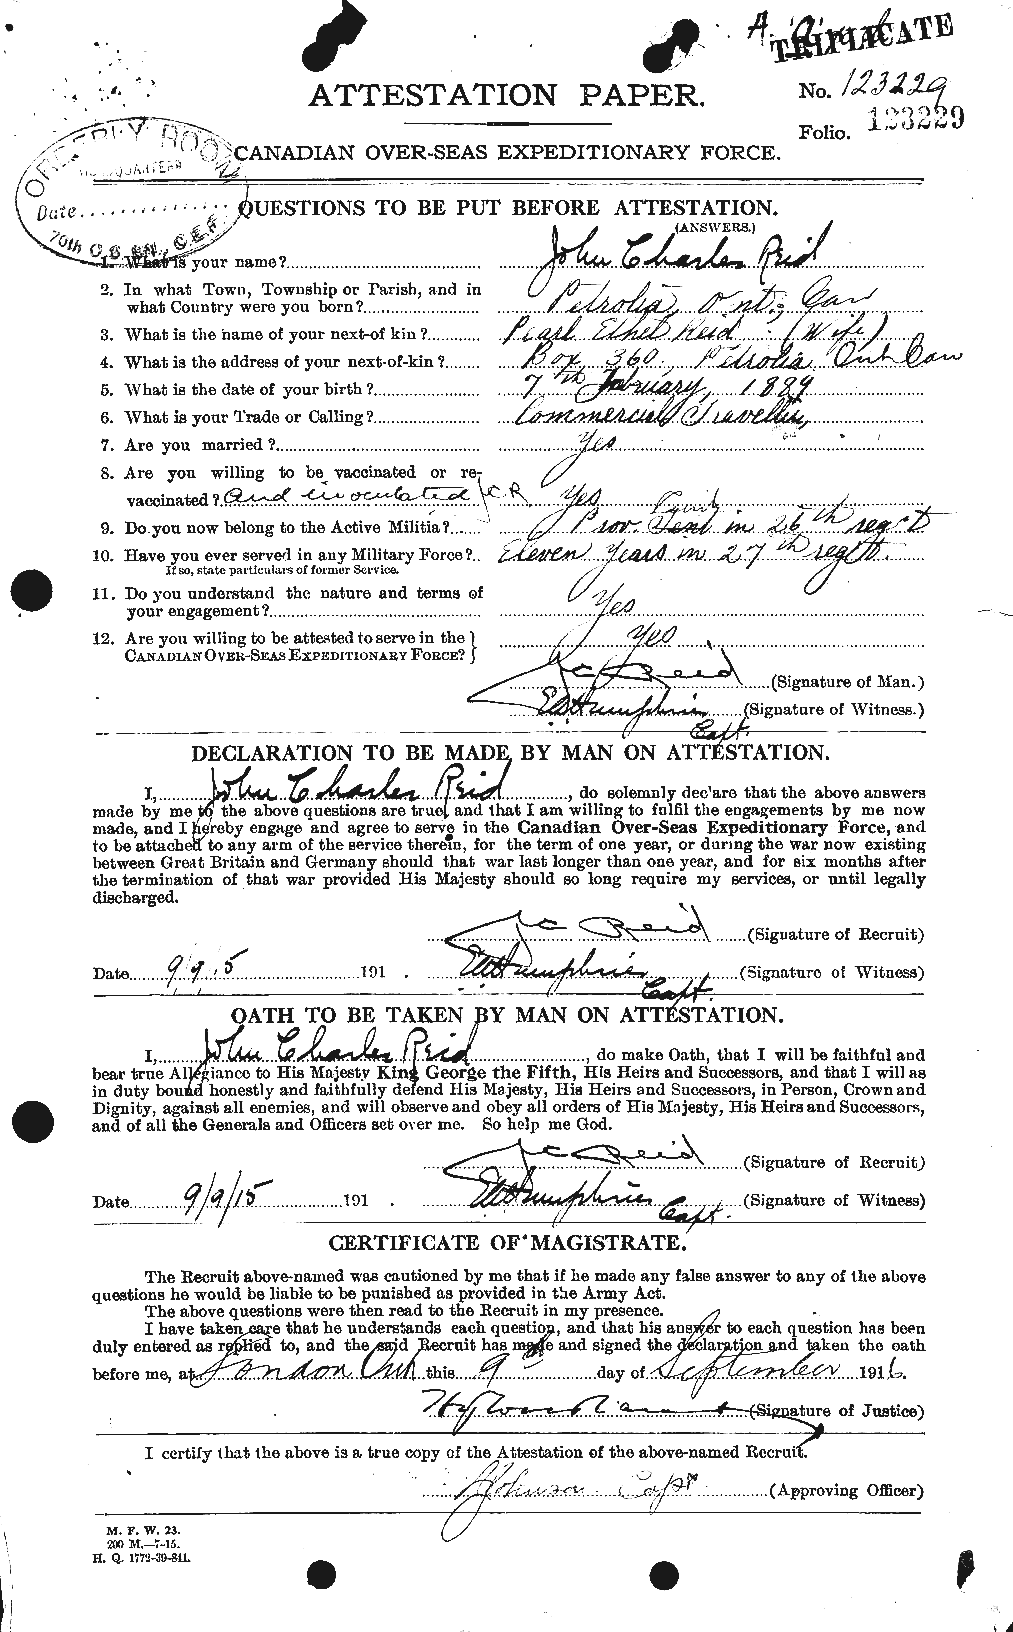 Personnel Records of the First World War - CEF 598824a